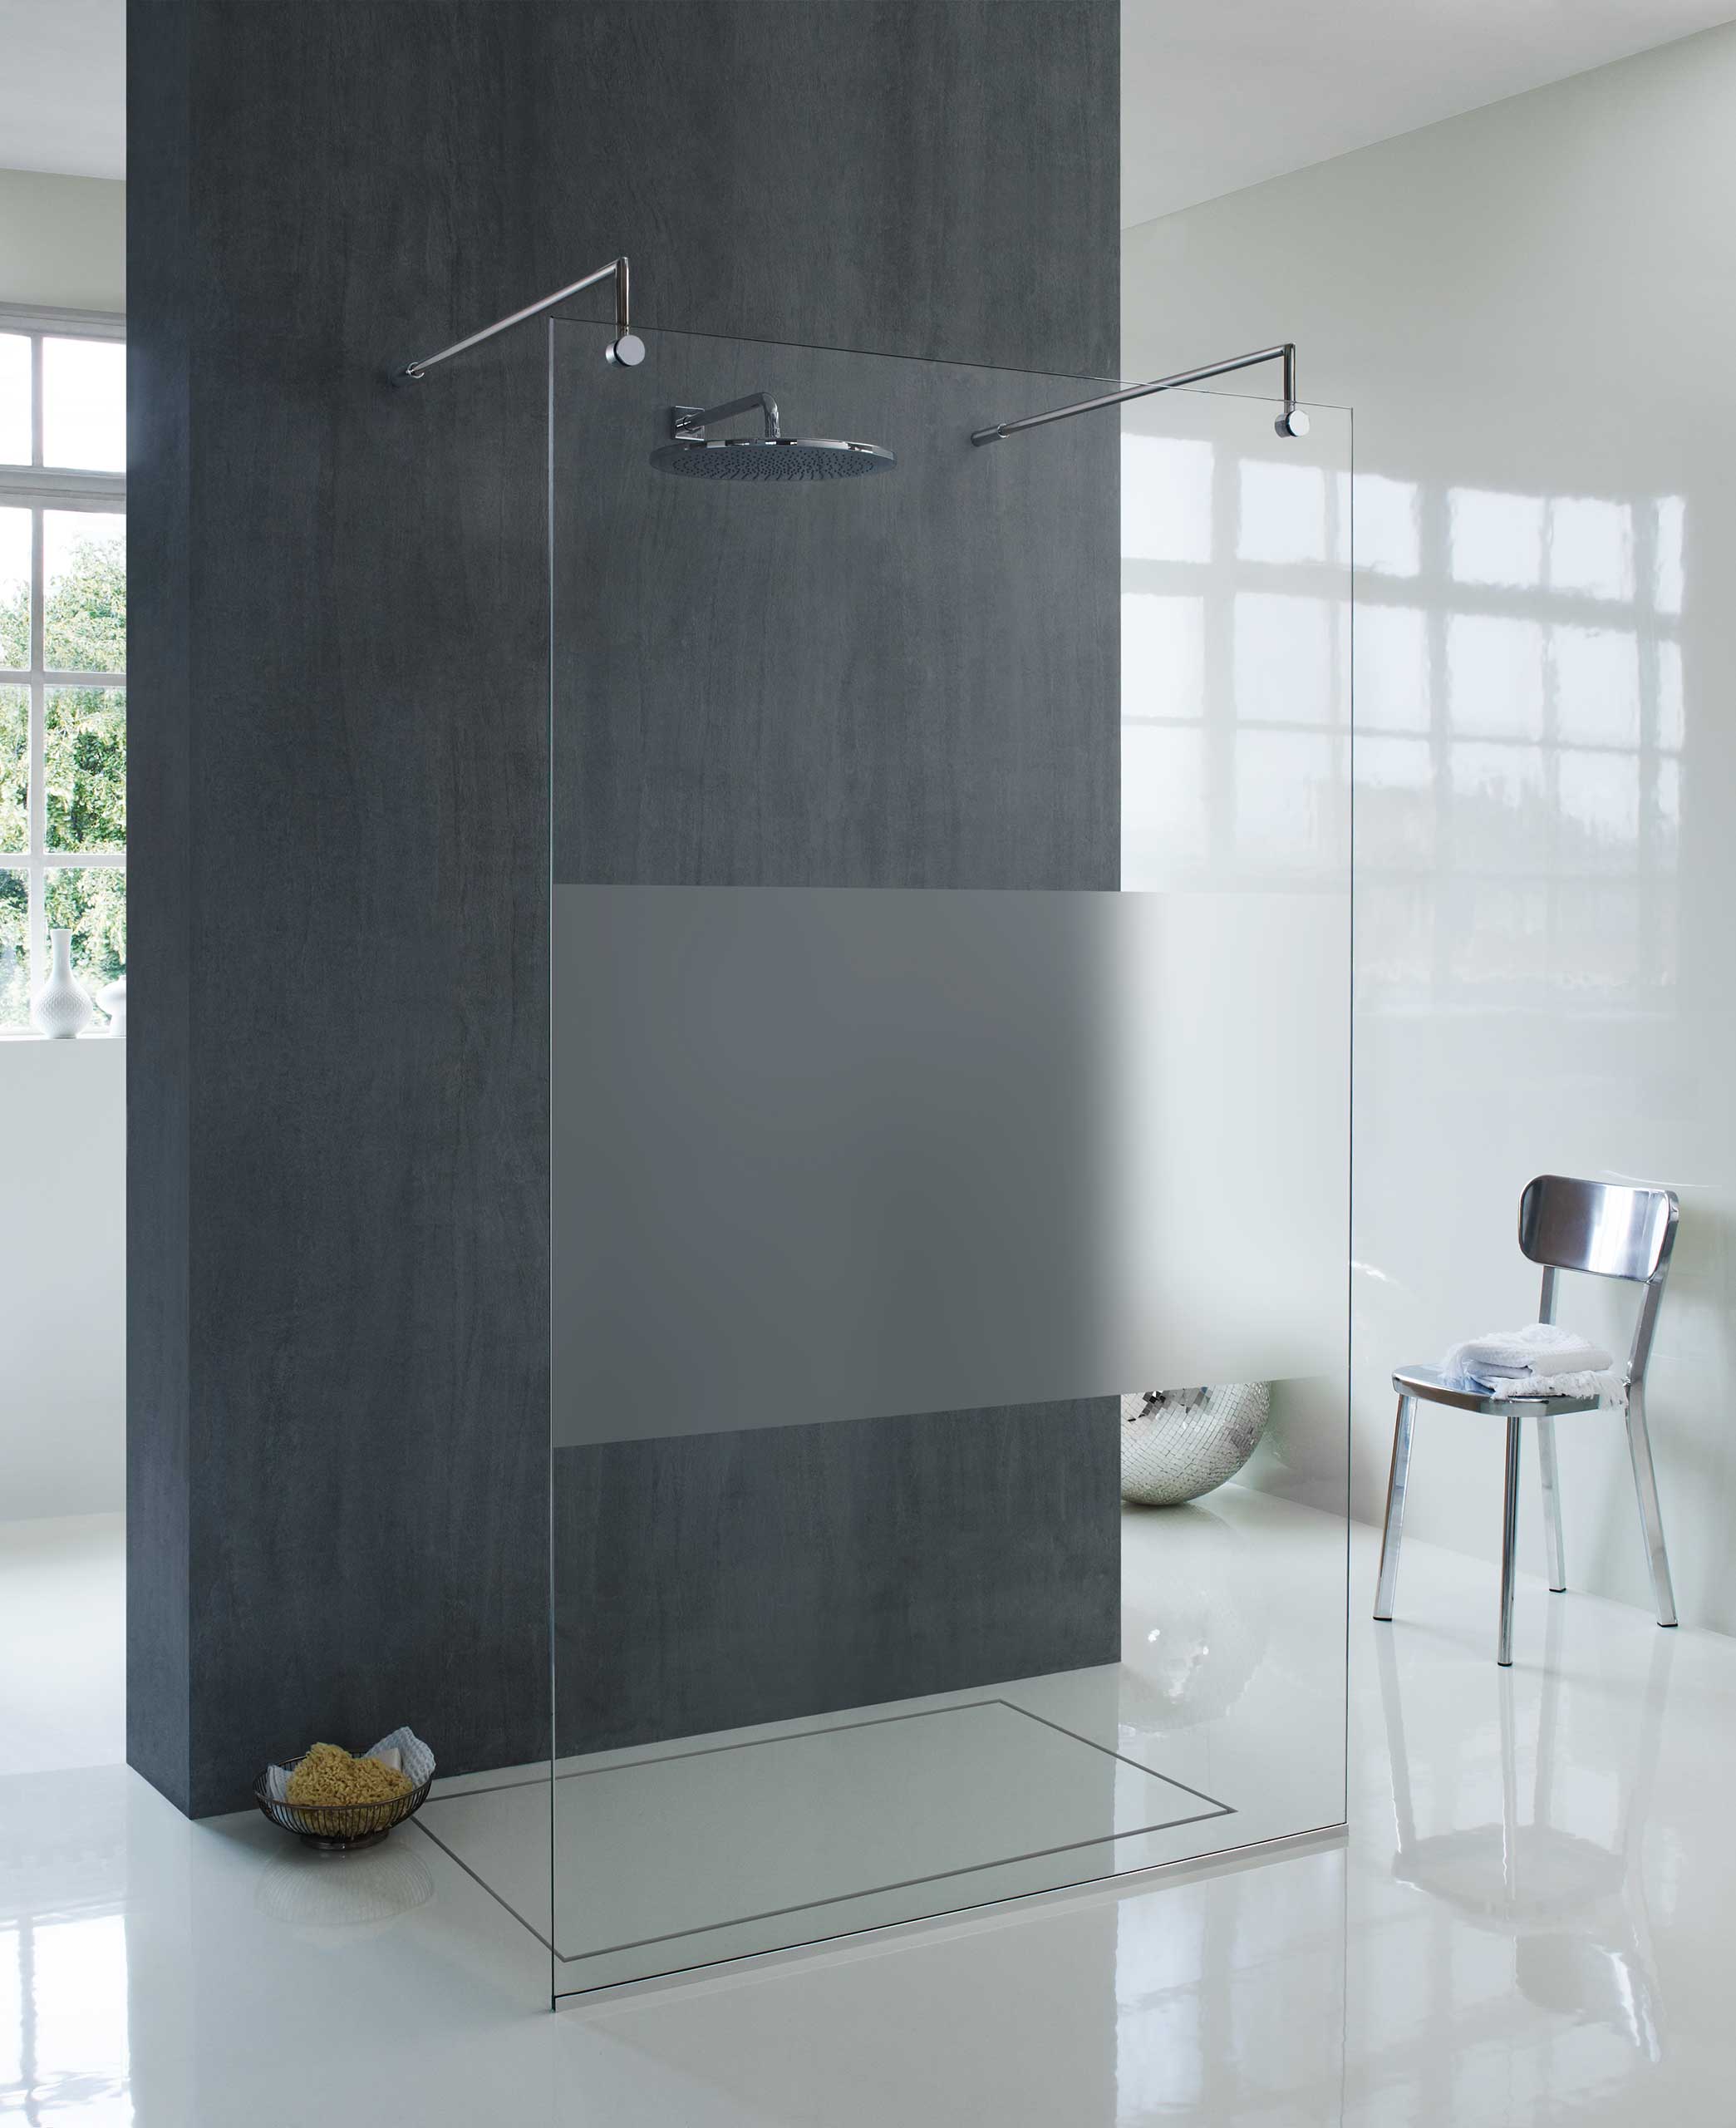 Oslo freestanding shower screen with modesty band